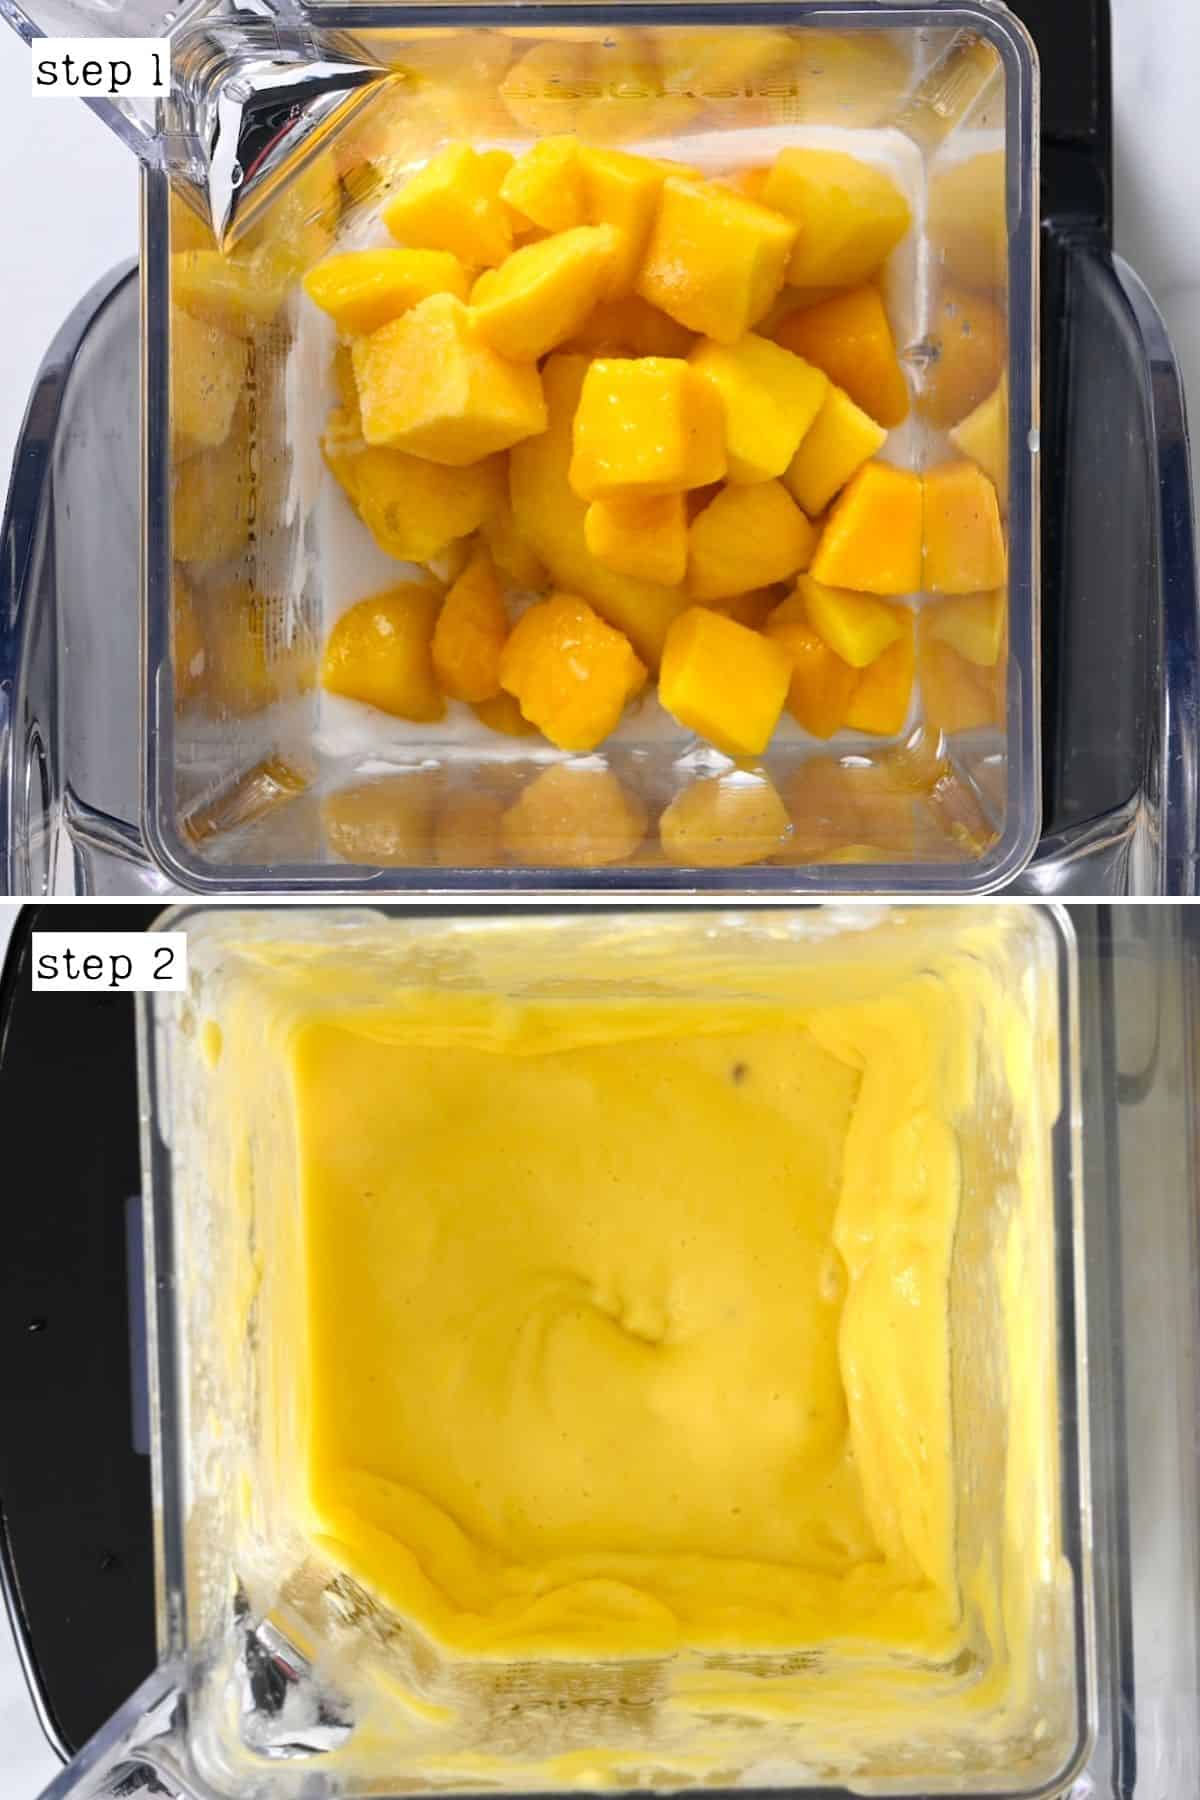 Steps for making mango pineapple smoothie